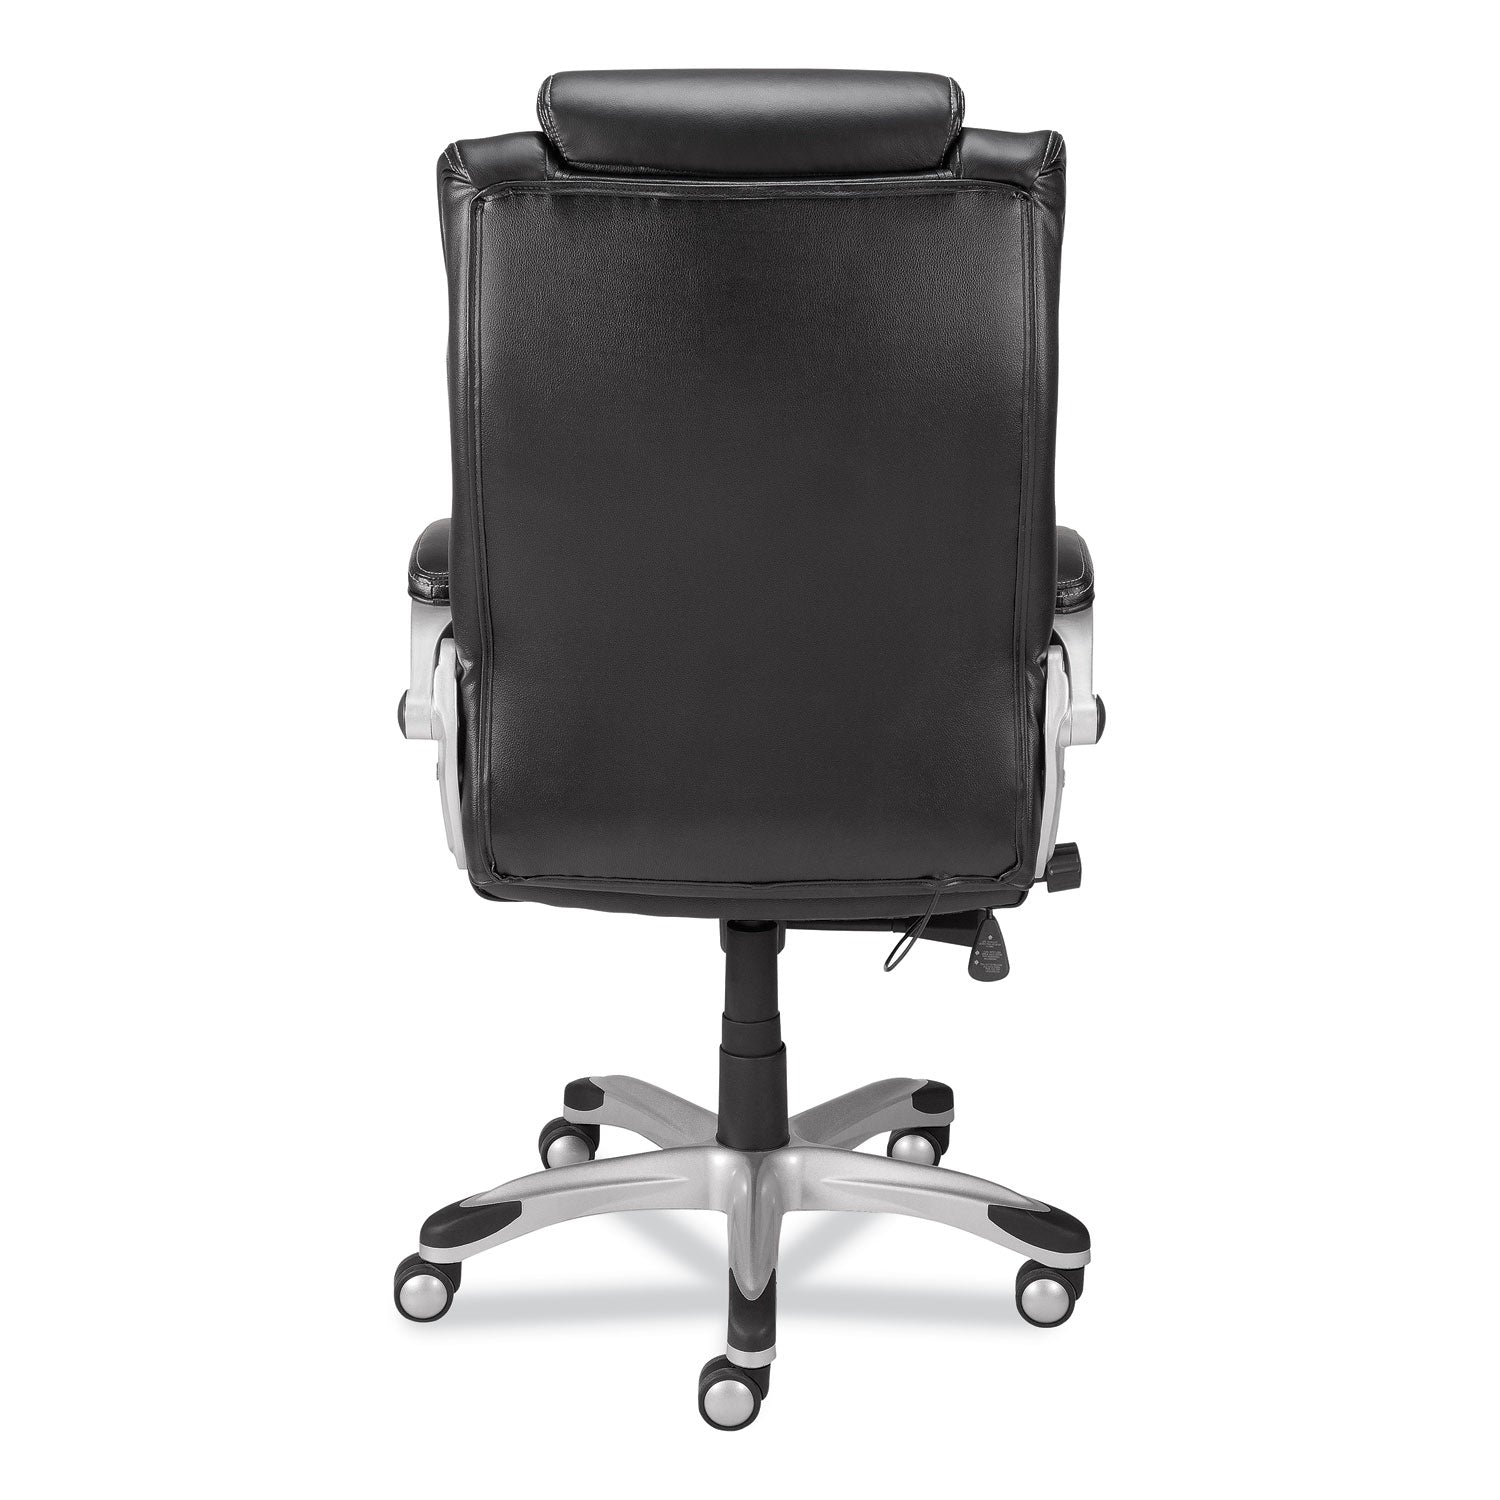 Alera Maurits Highback Chair, Supports Up to 275 lb, Black Seat/Back, Chrome Base - 4